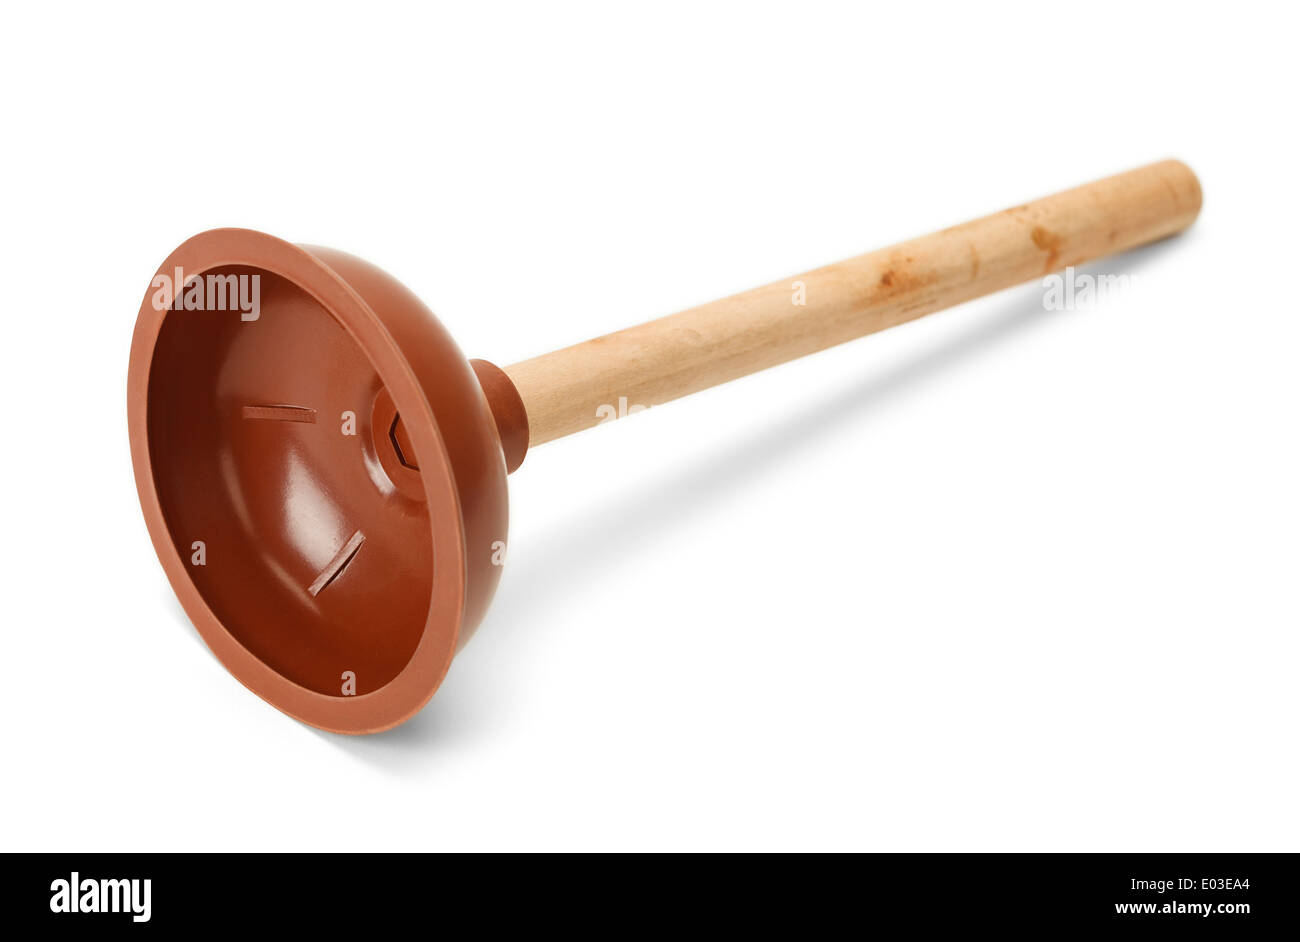 Bathroom Plunger with Red Rubber Cup and Wood Handle Isolated on White Background. Stock Photo